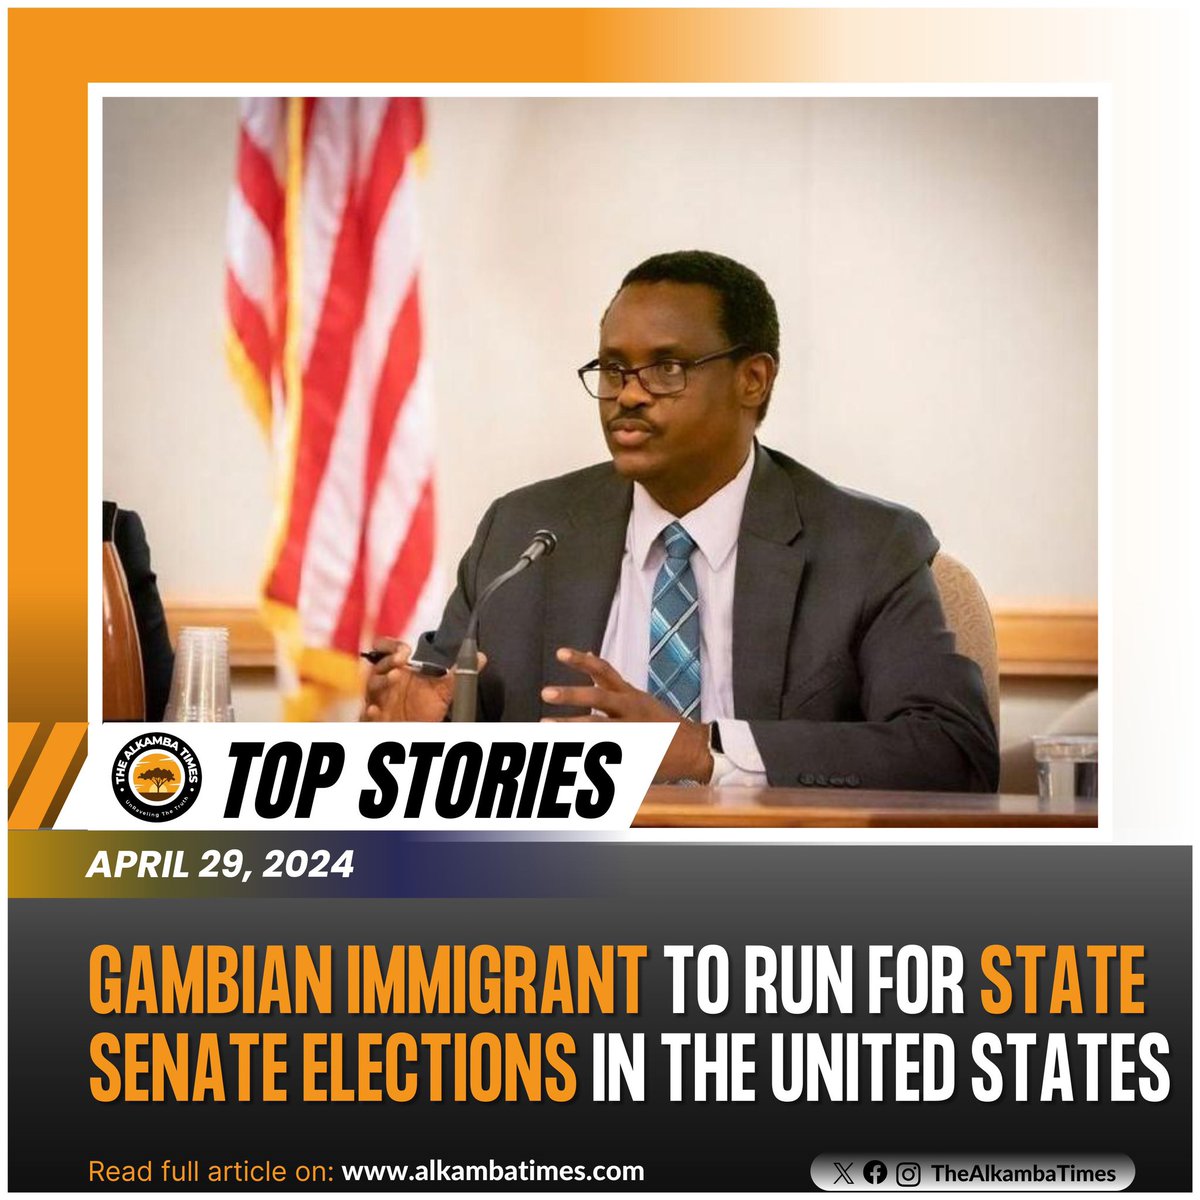 Mr. Baldeh confirmed his intention to run for state senate with Alkamba Times and called for support to achieve his dream as an African immigrant. His commitment to public service was further demonstrated when he was elected alder on the City of Madison Common Council in 2015. In